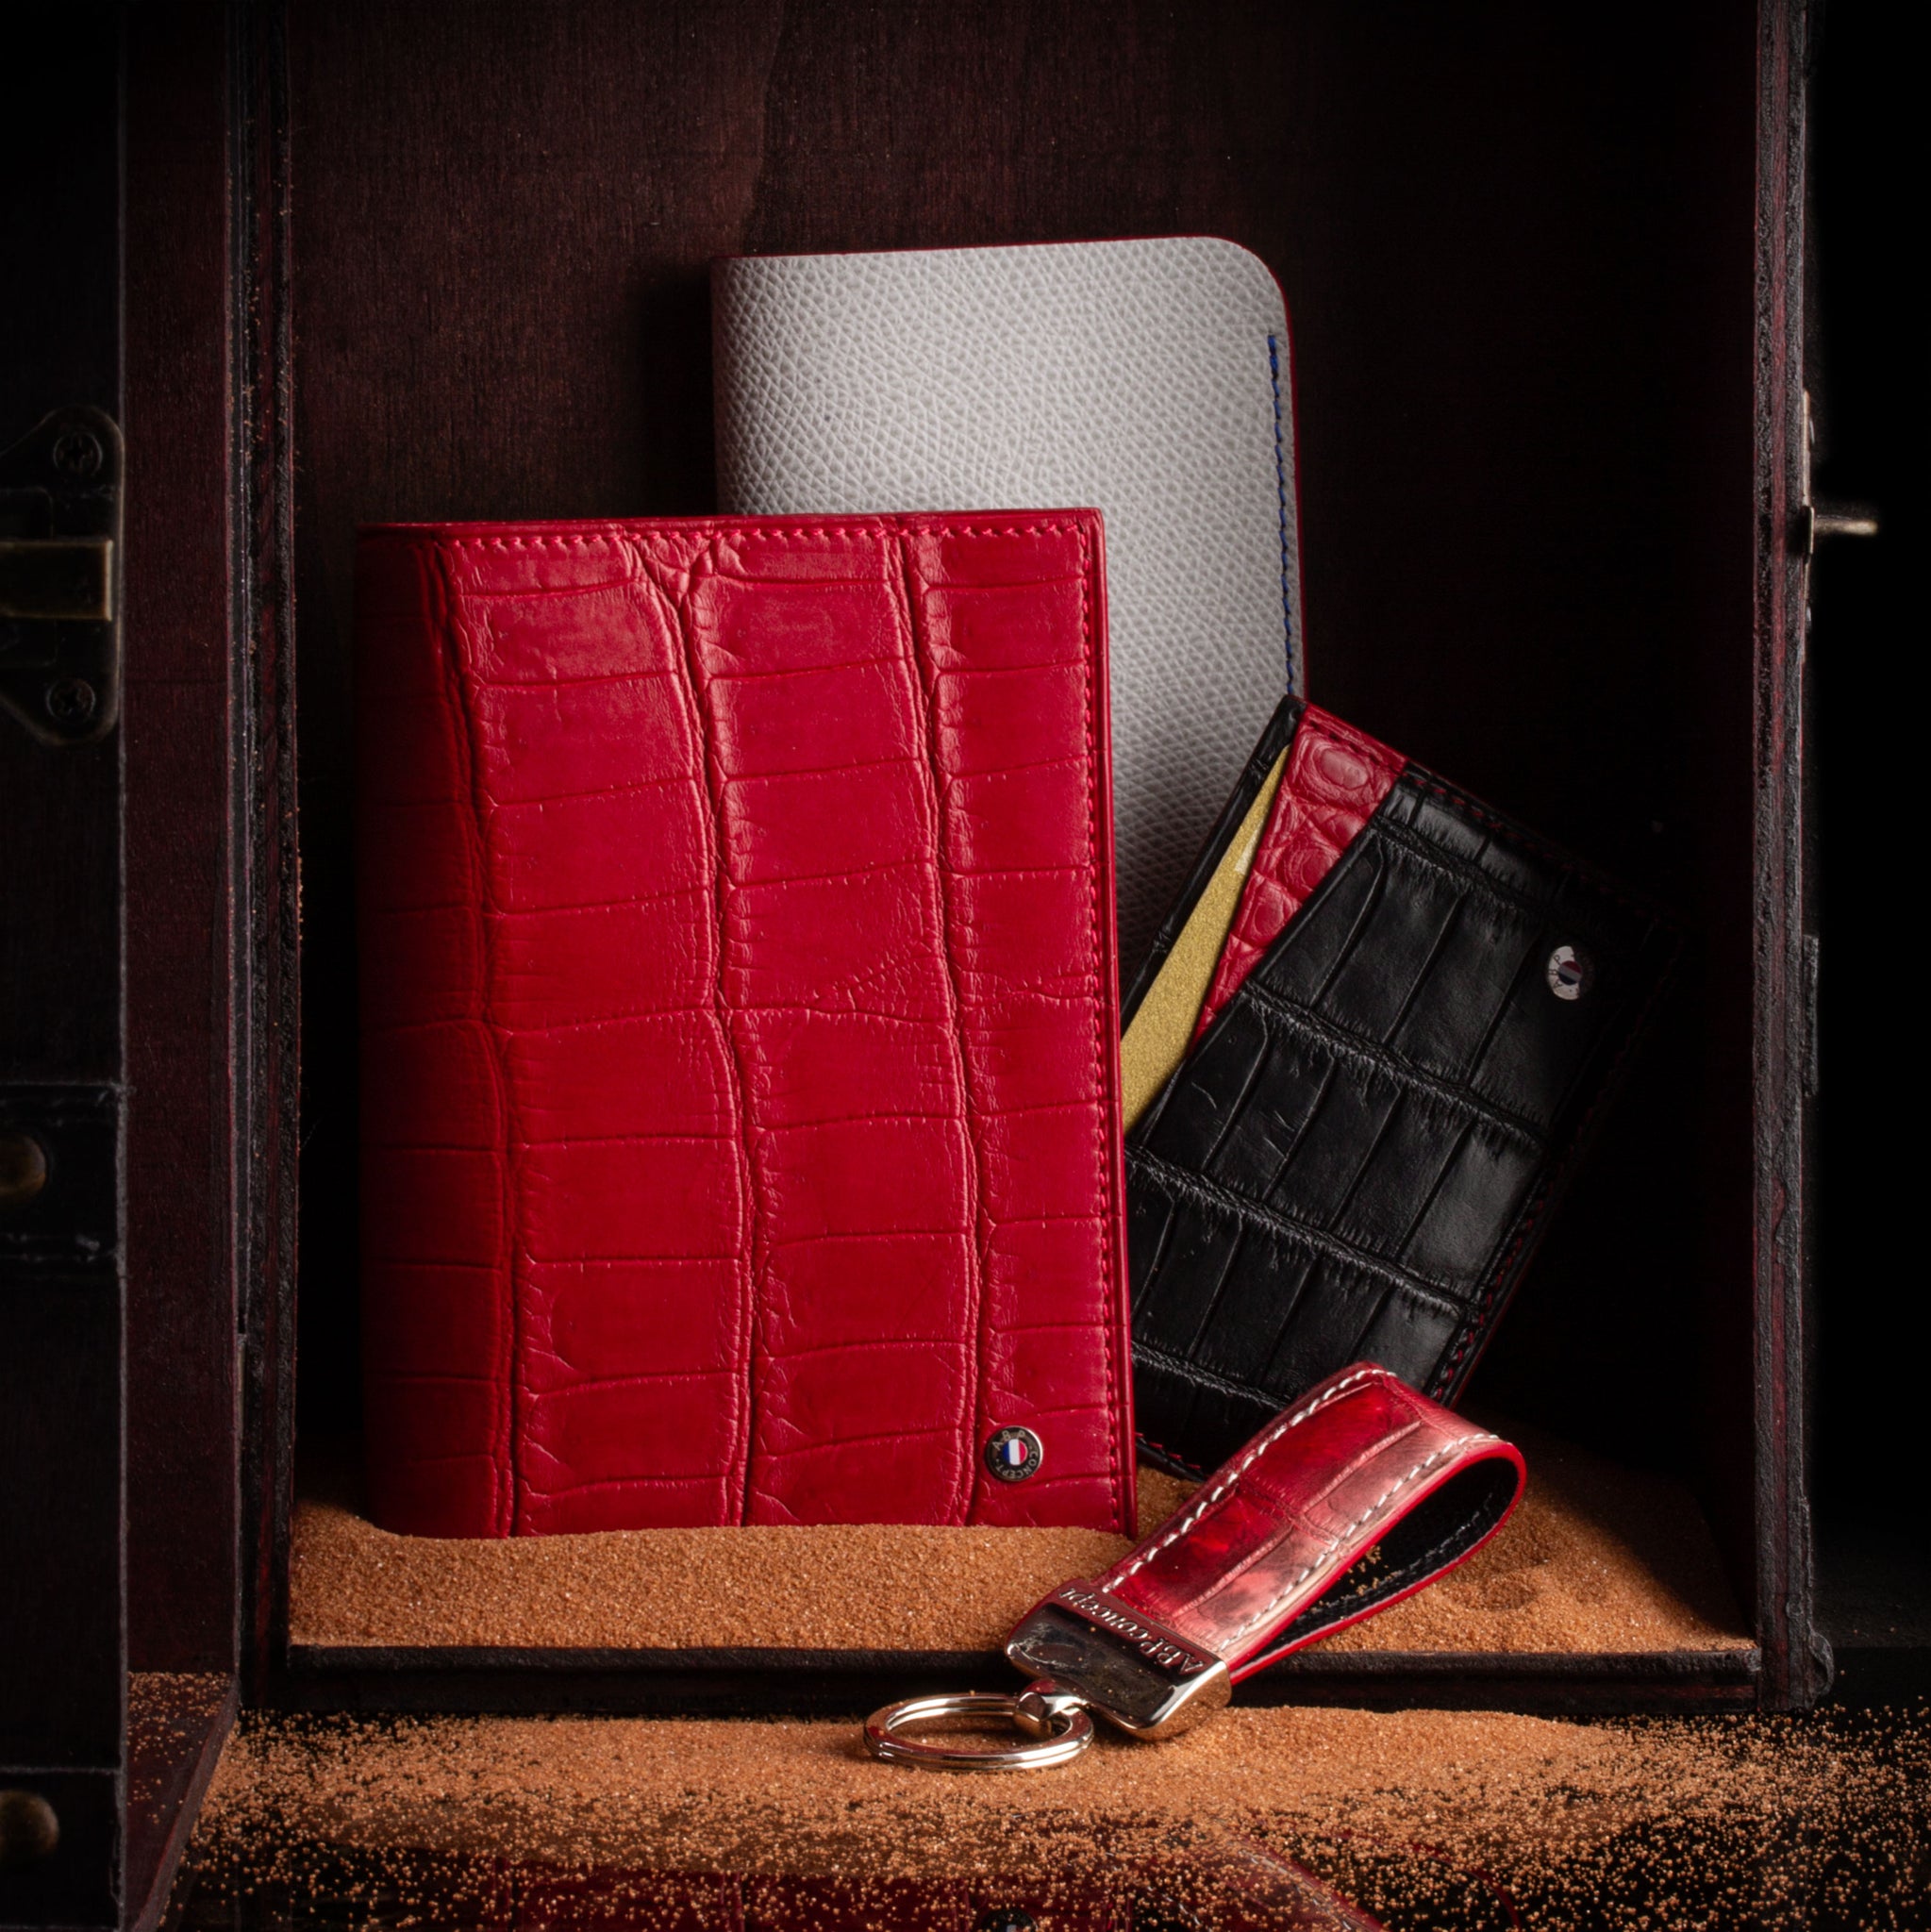 Valentine's Day" pack - Small leather goods set